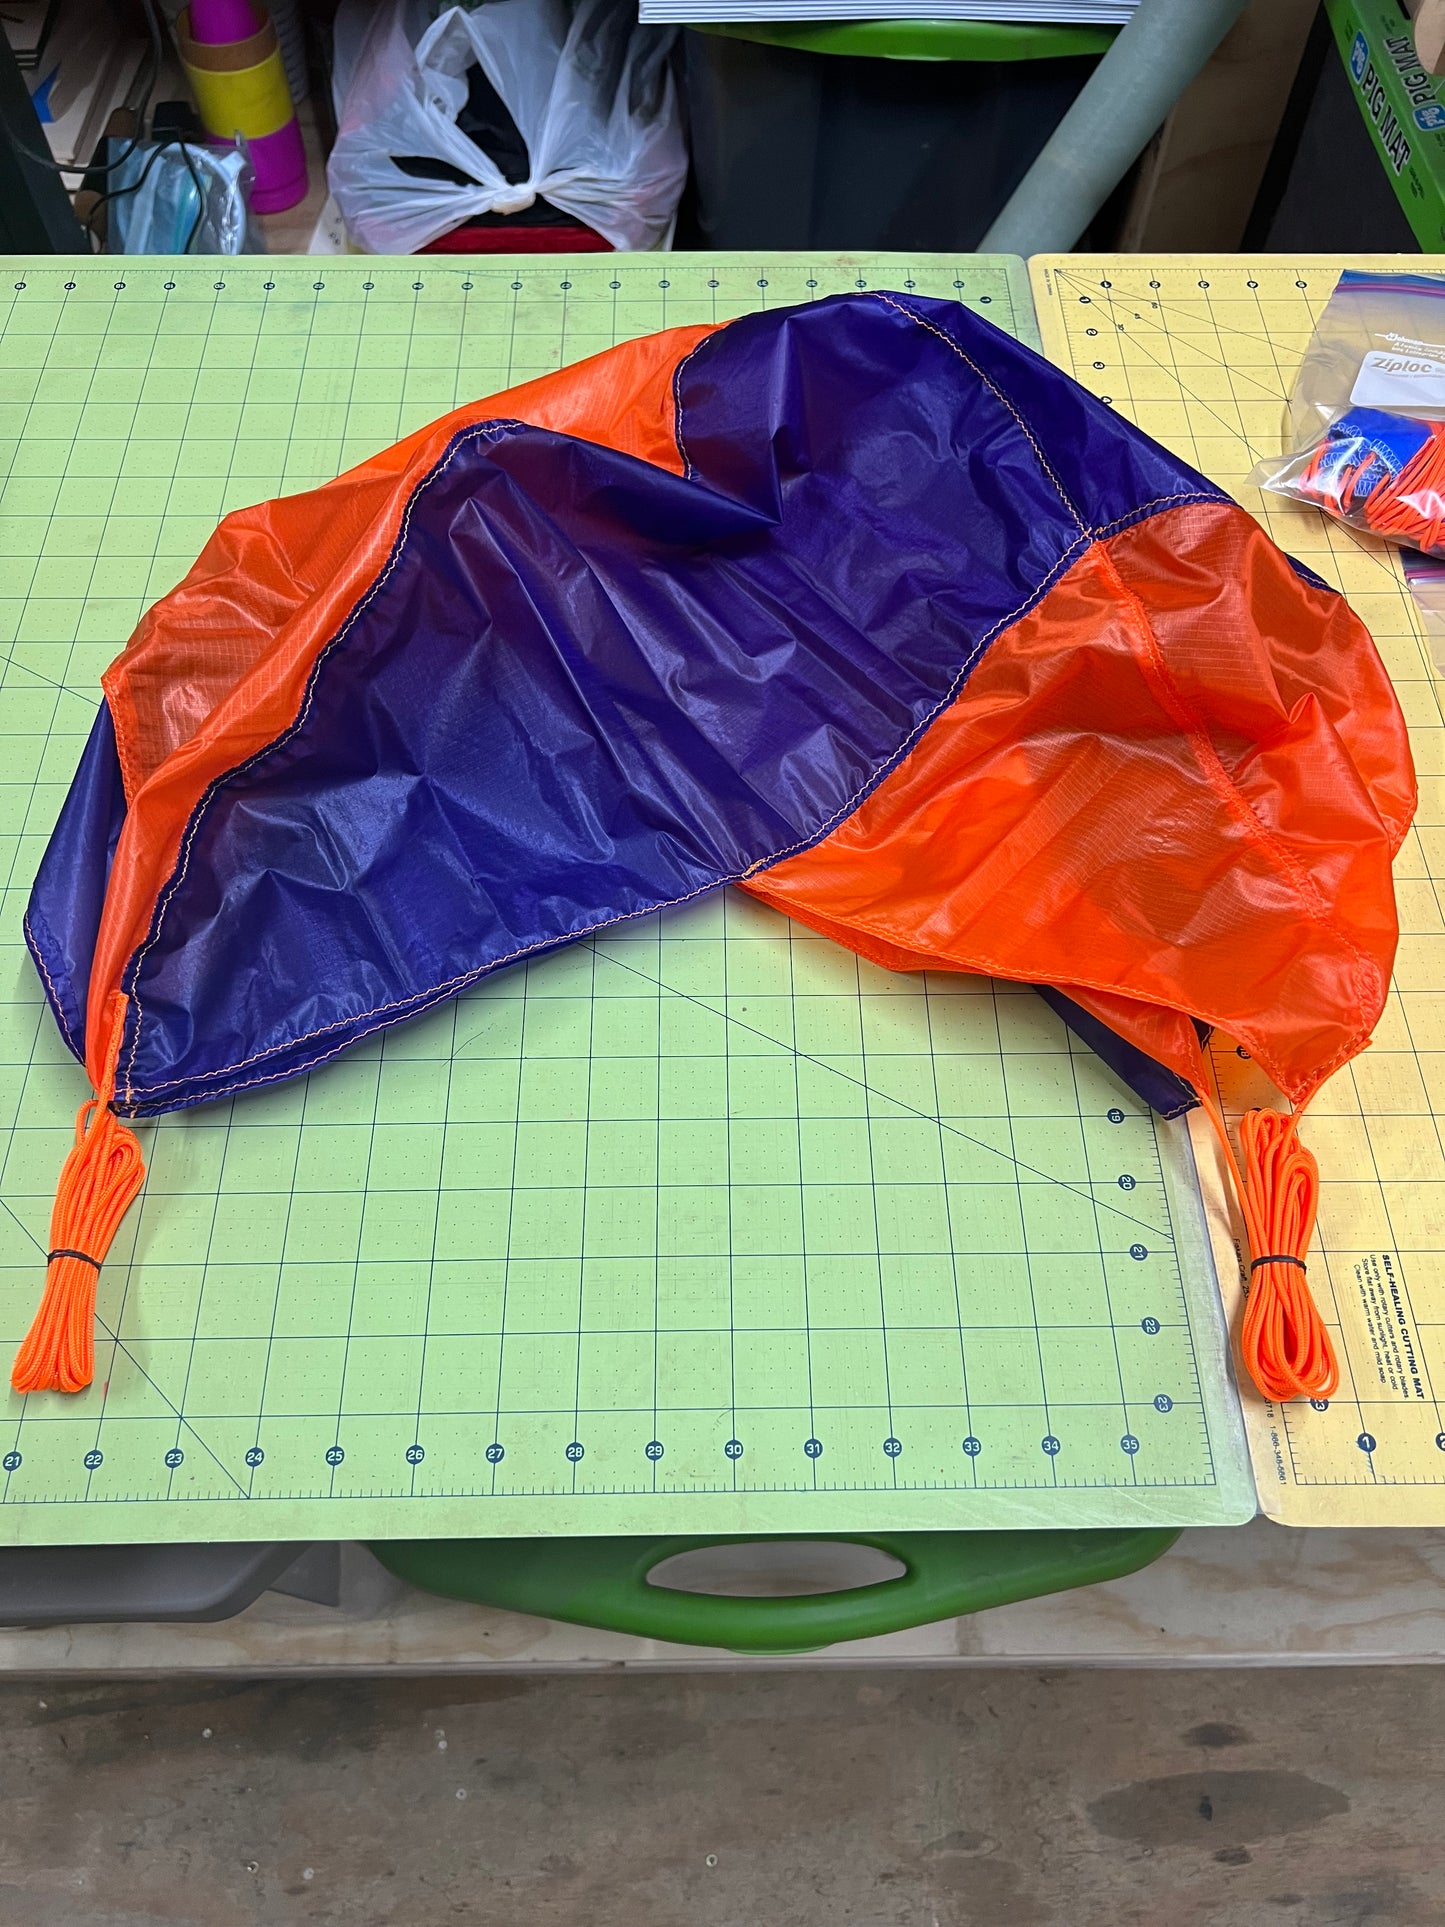 DR-5 Parabolic Cupped Parachute